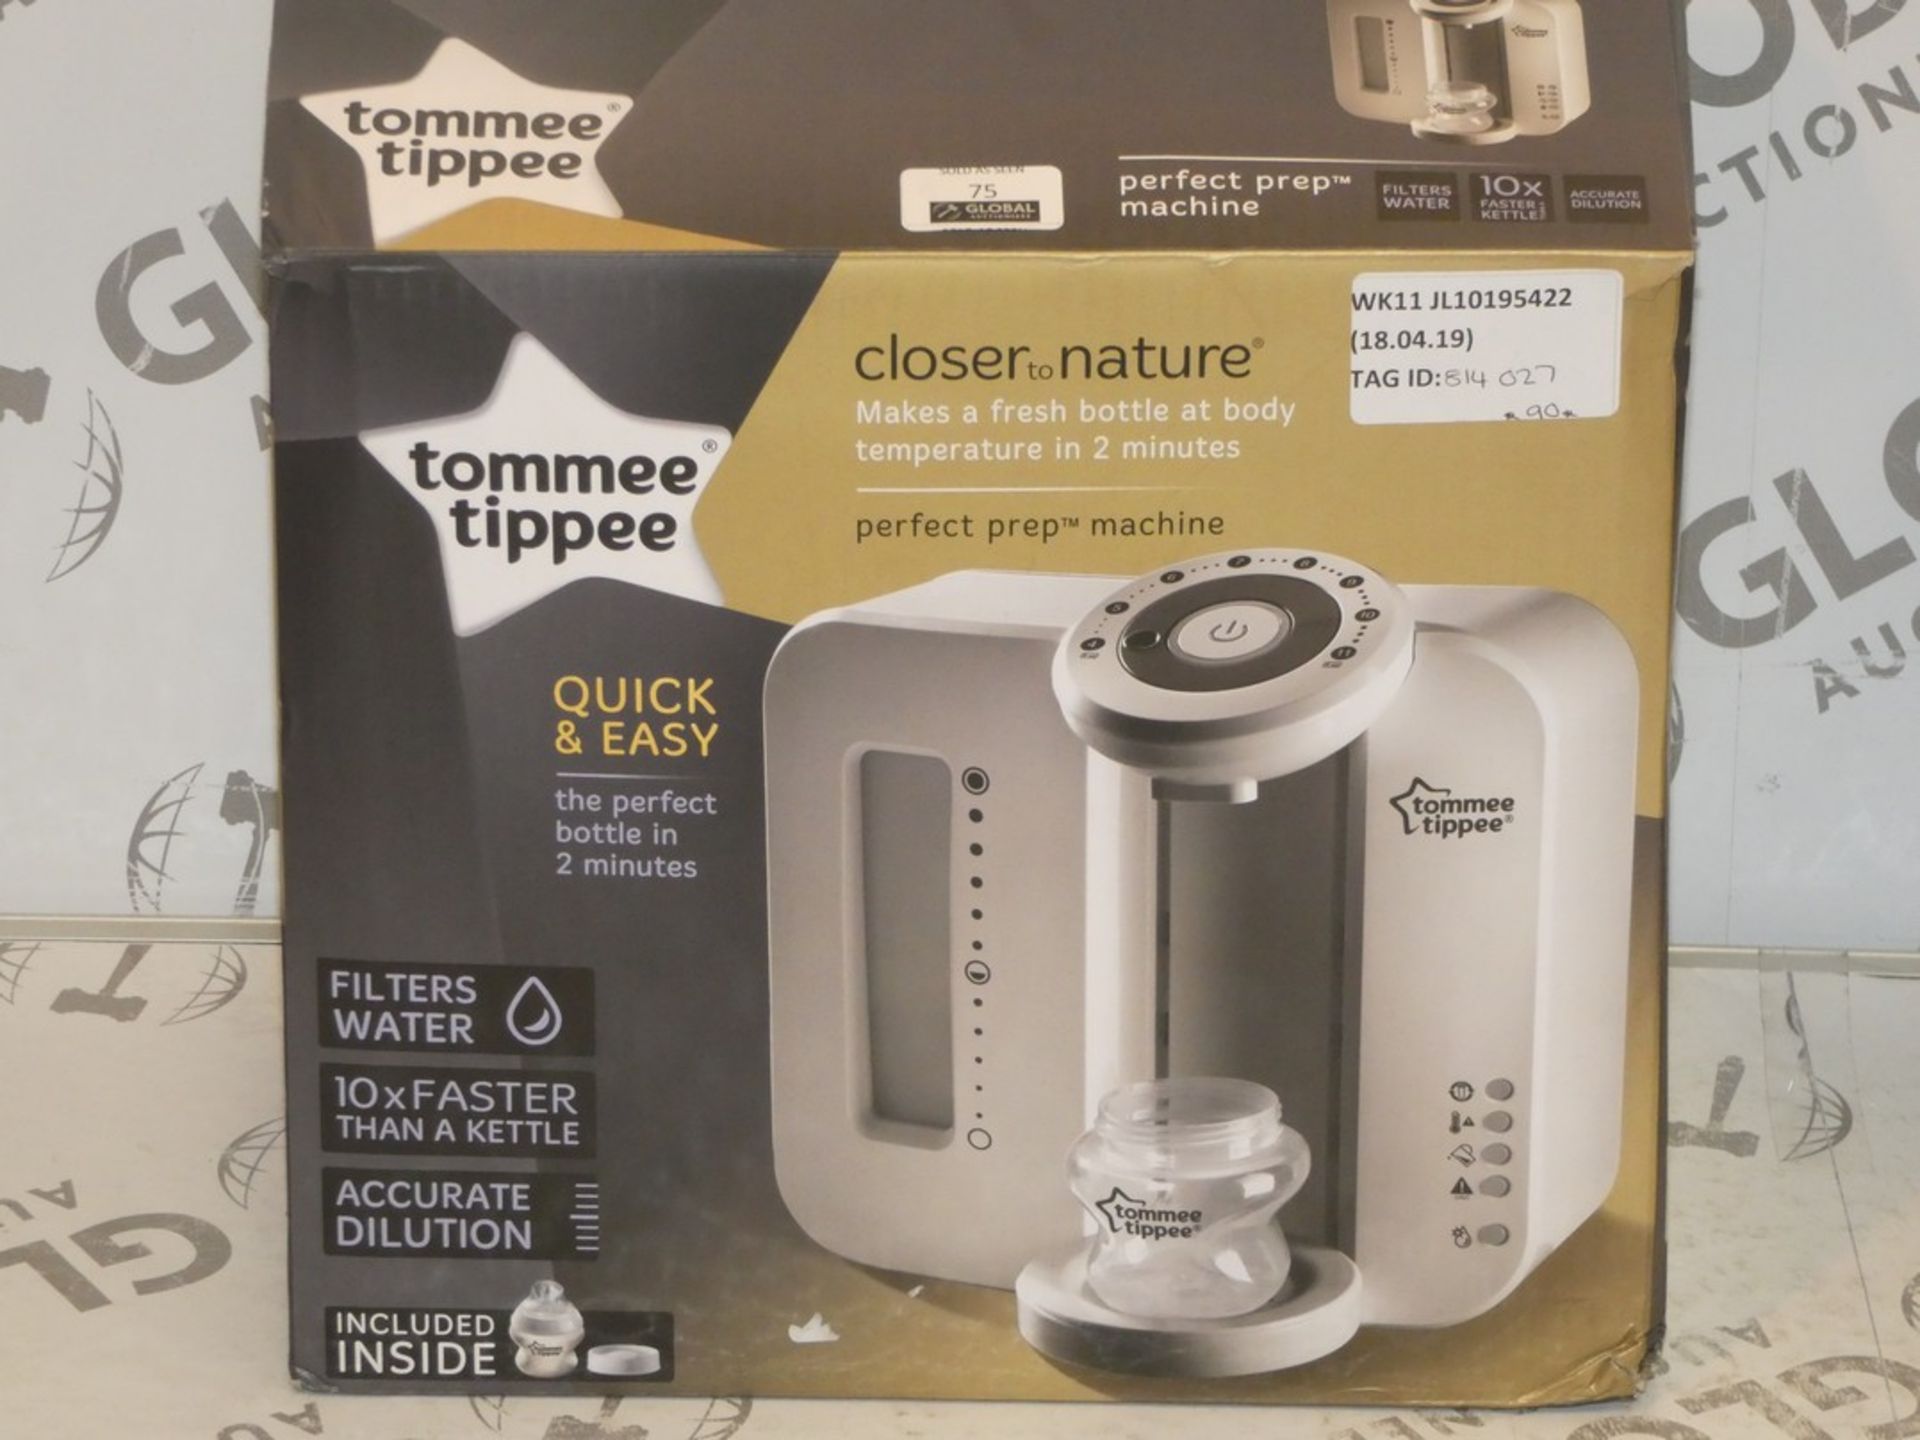 Boxed Tommee Tippee Closer To Nature Perfect Preparation Bottle Warming Station RRP £90 (814027)